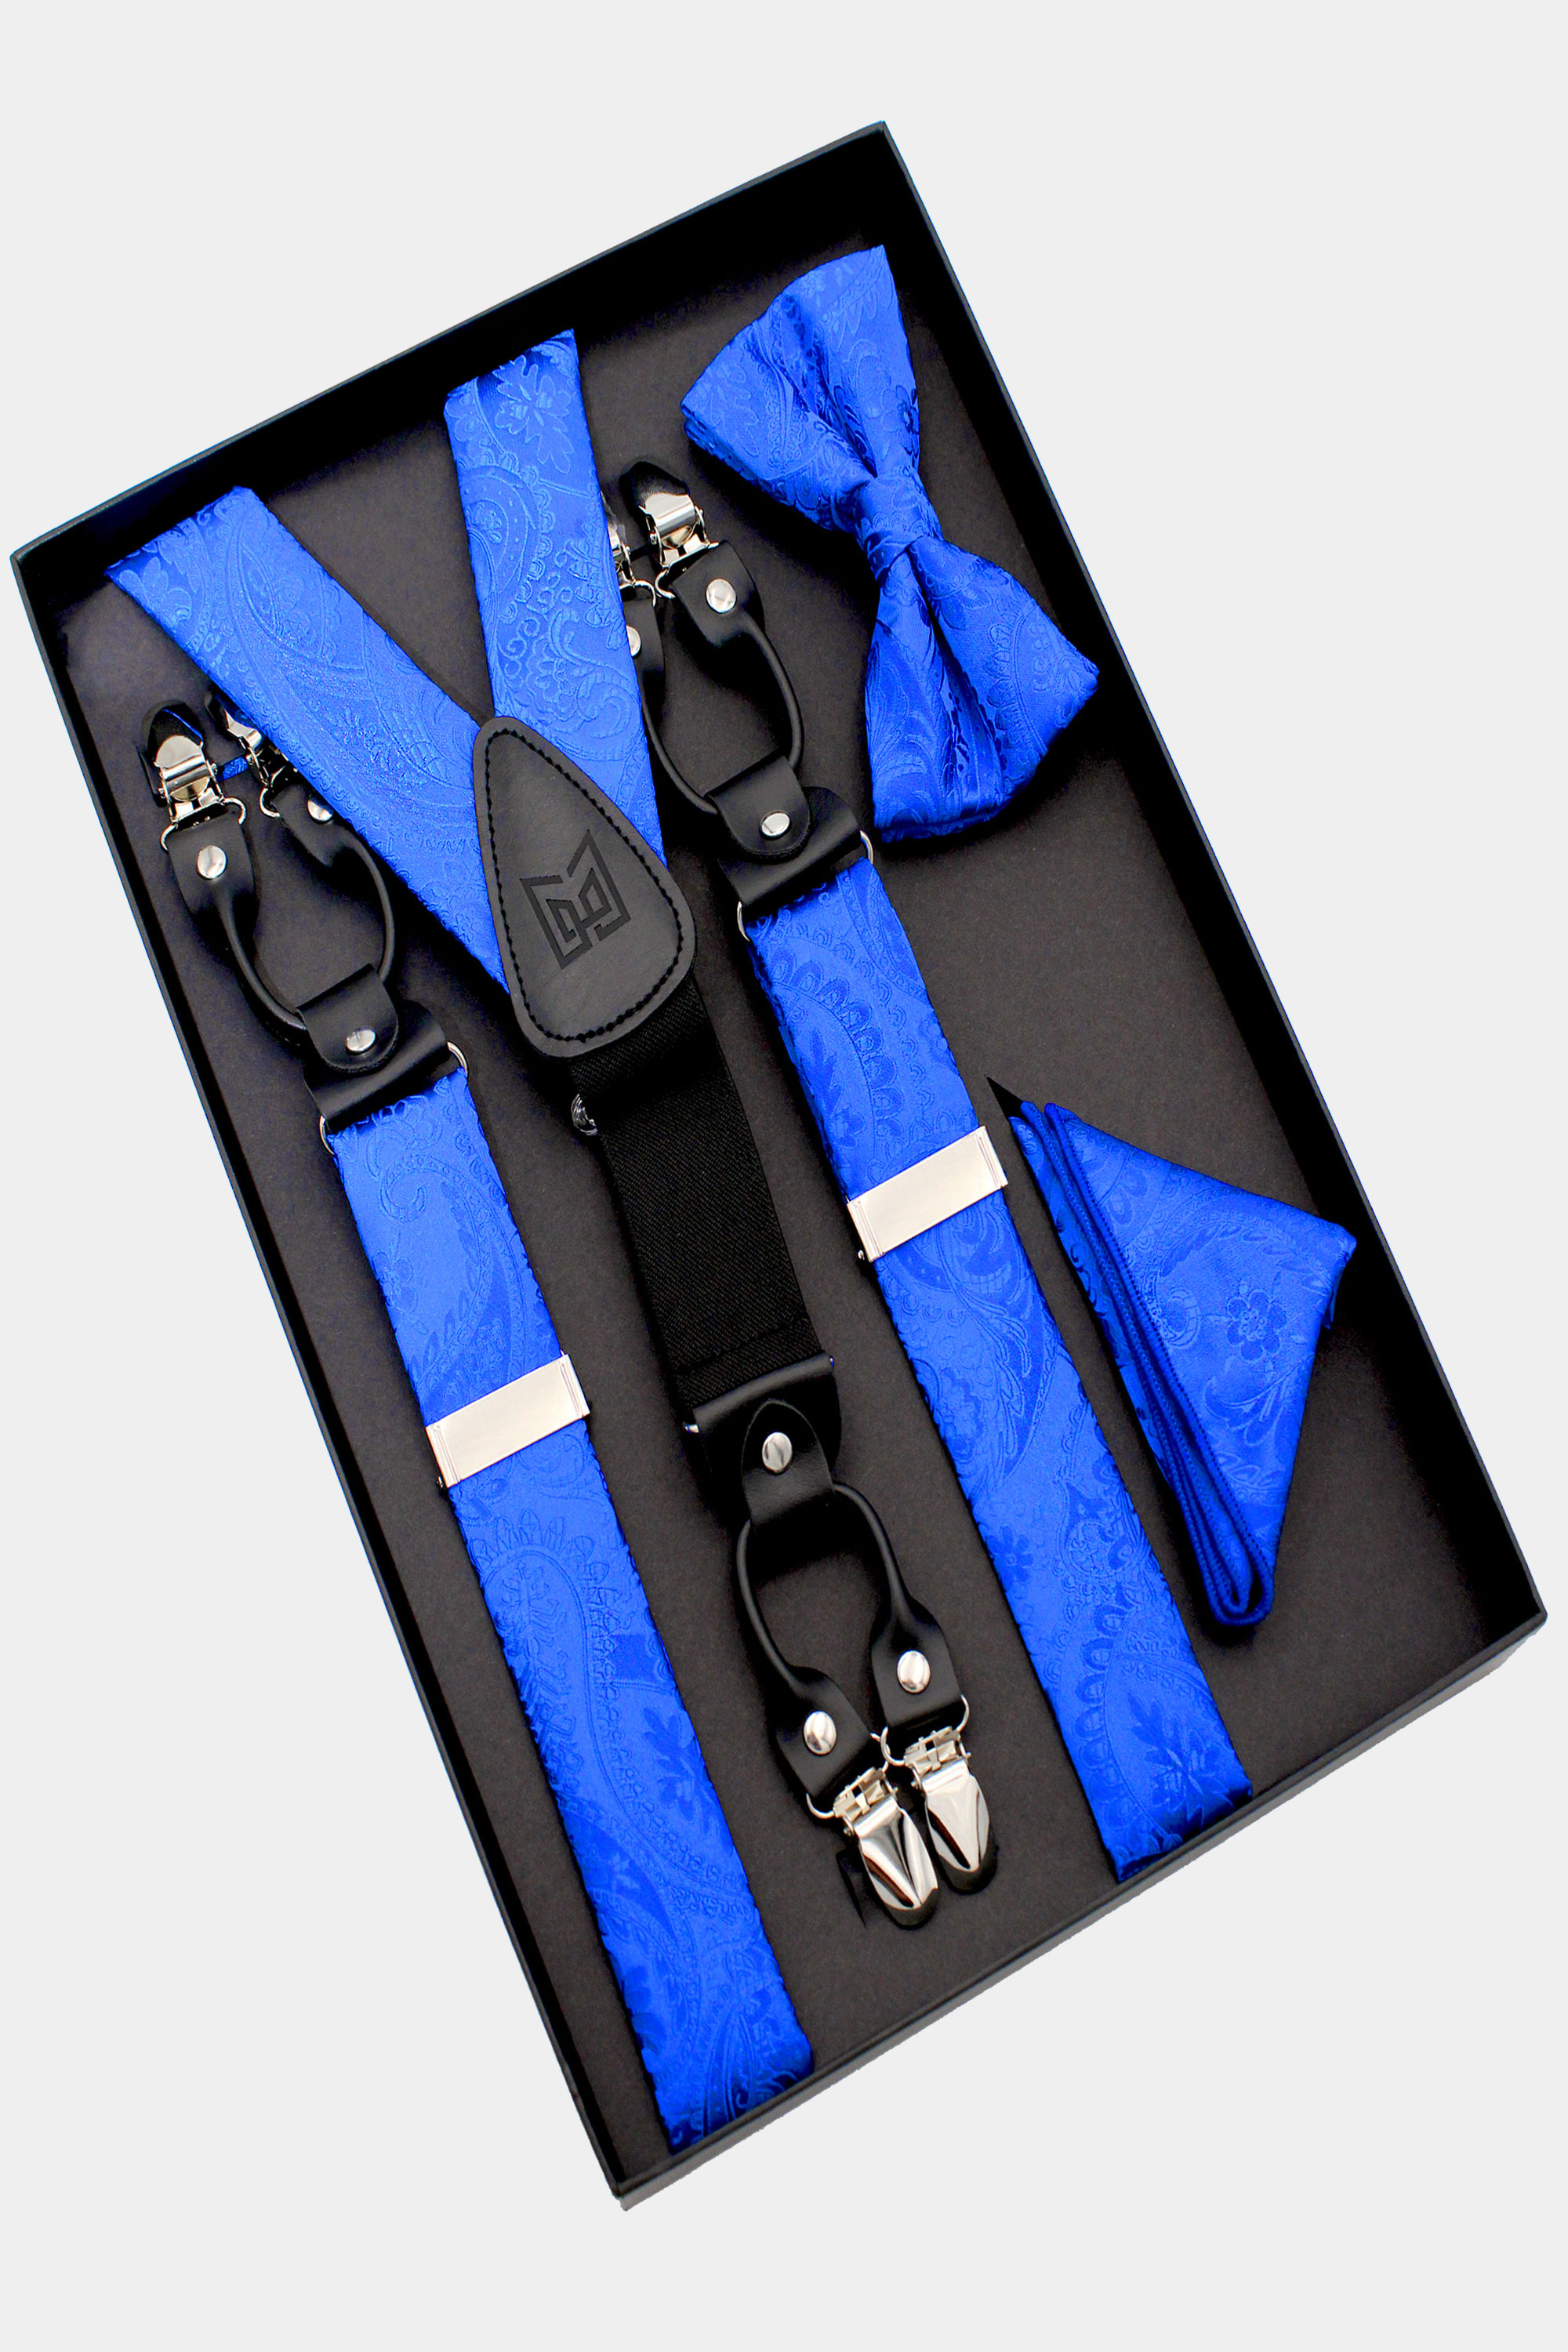 Blue Bow Tie and Suspenders Set